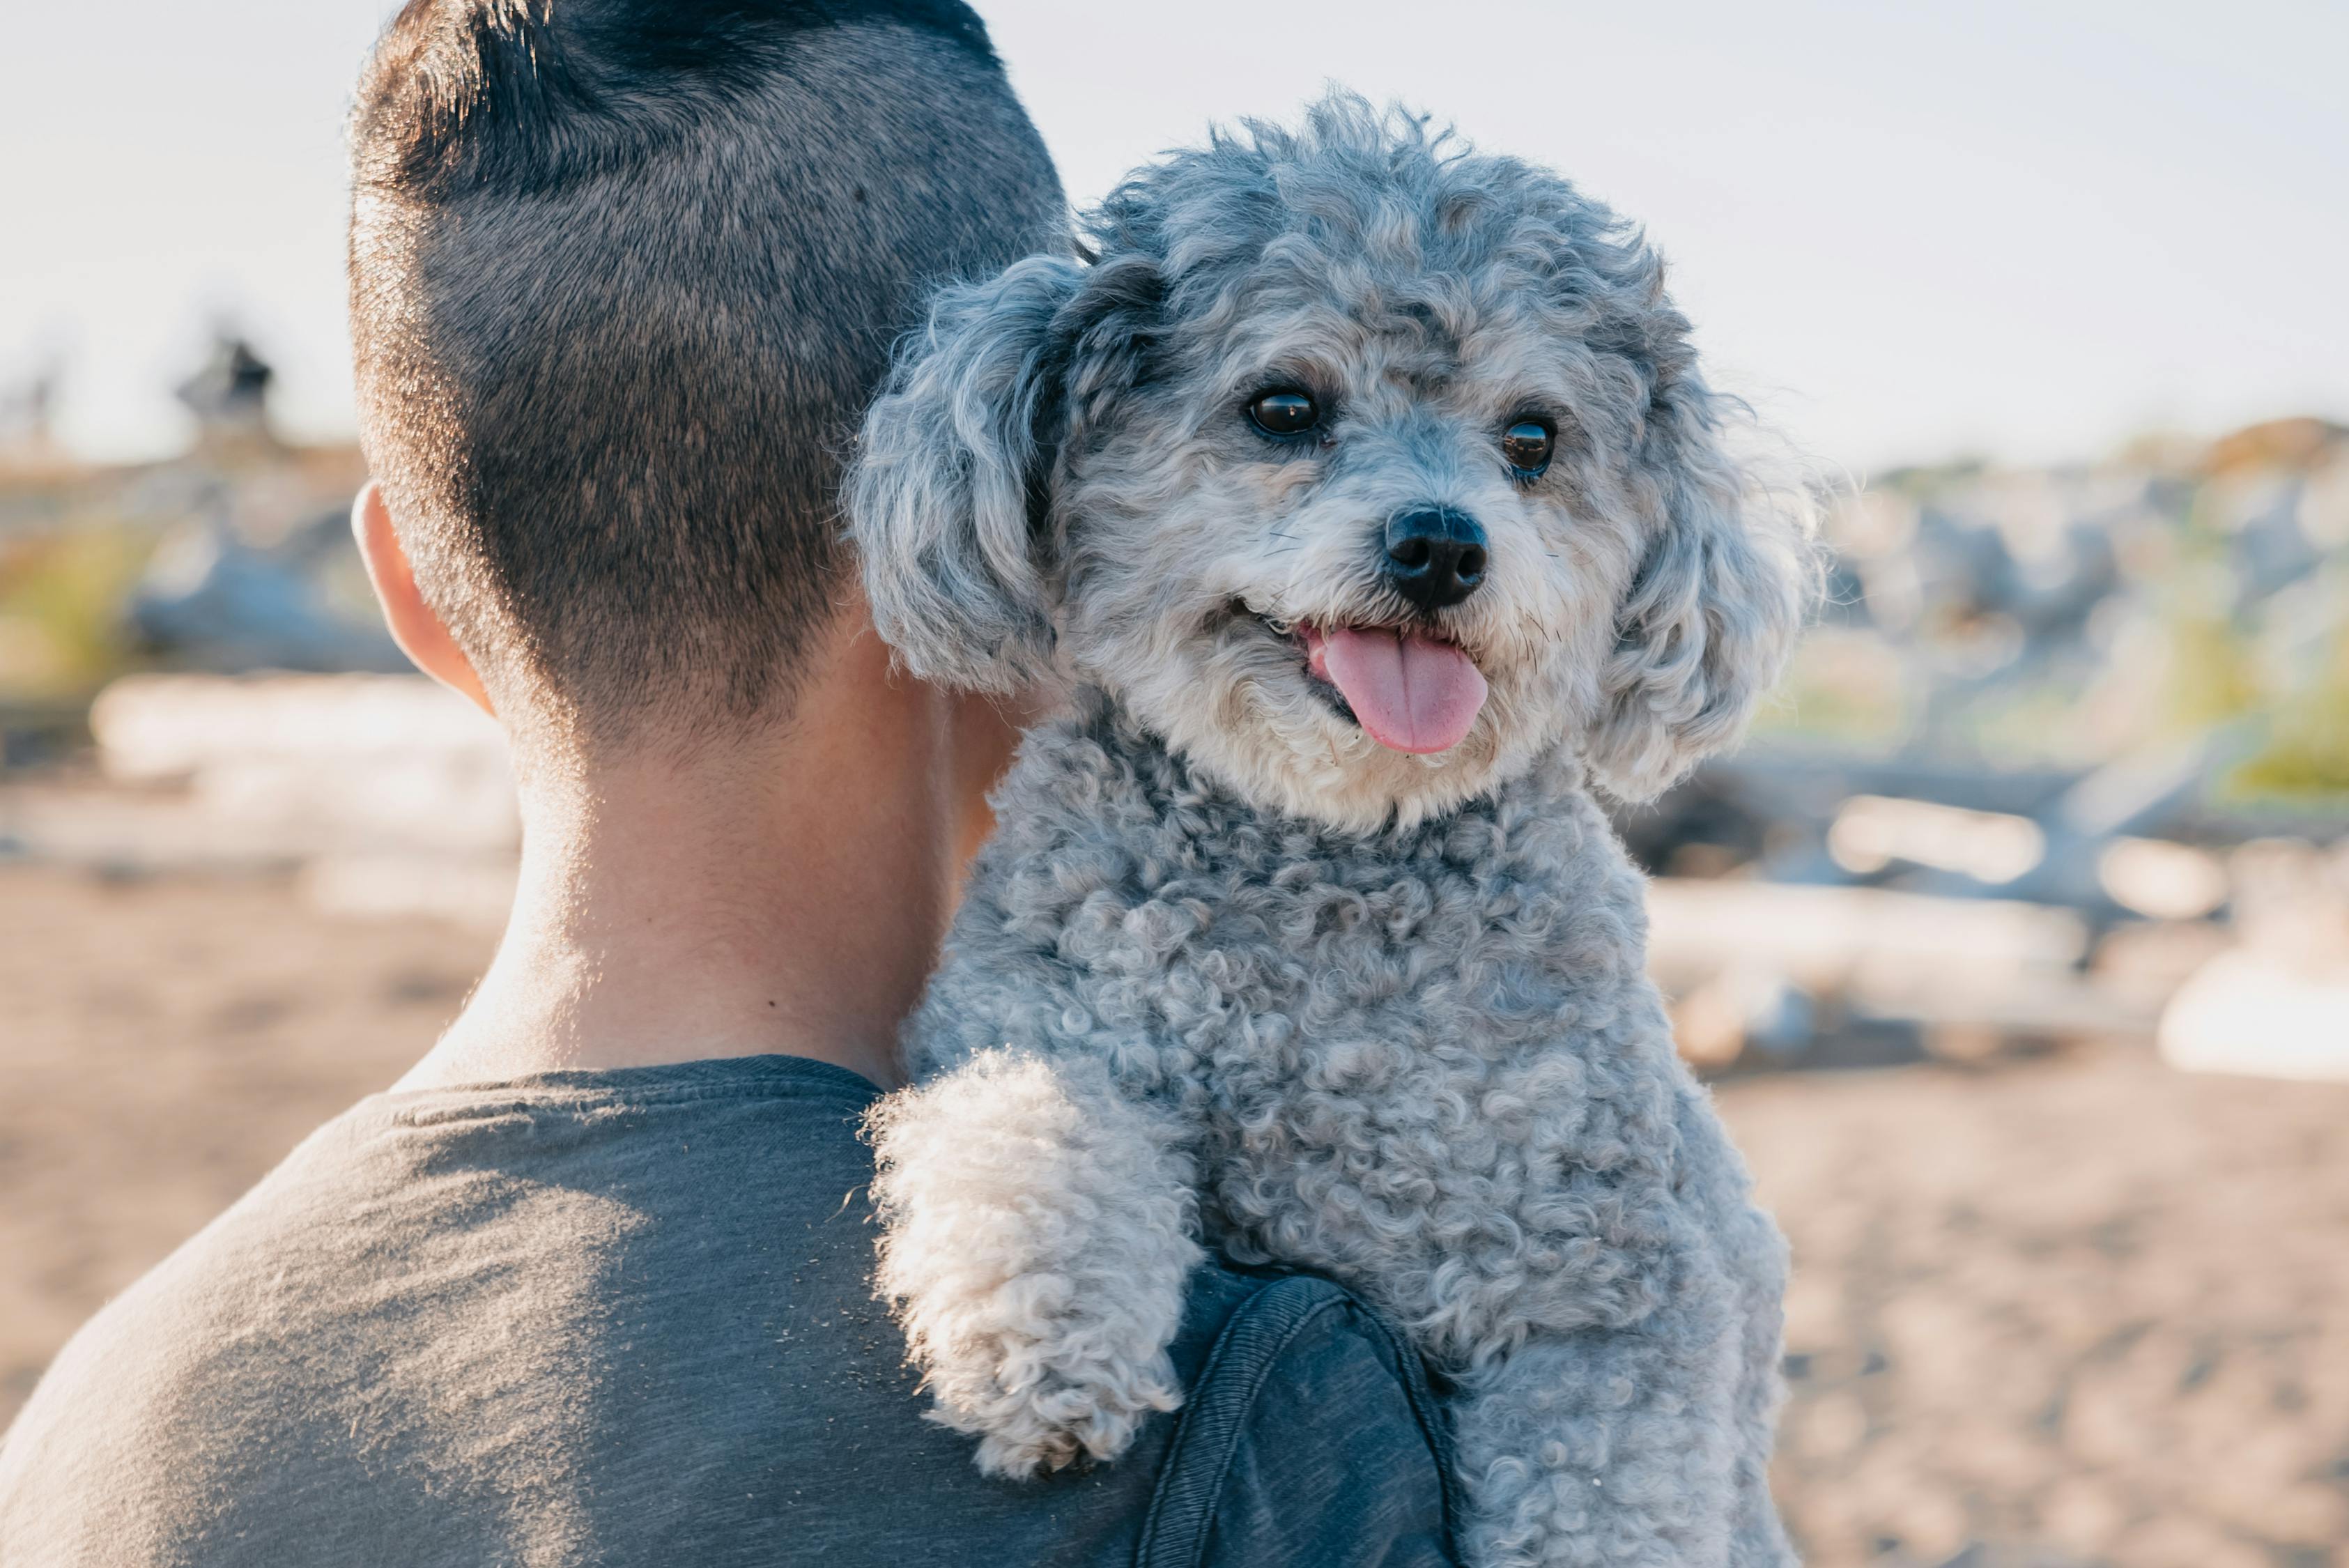 A Cute Gray Poodle Carried by a Person